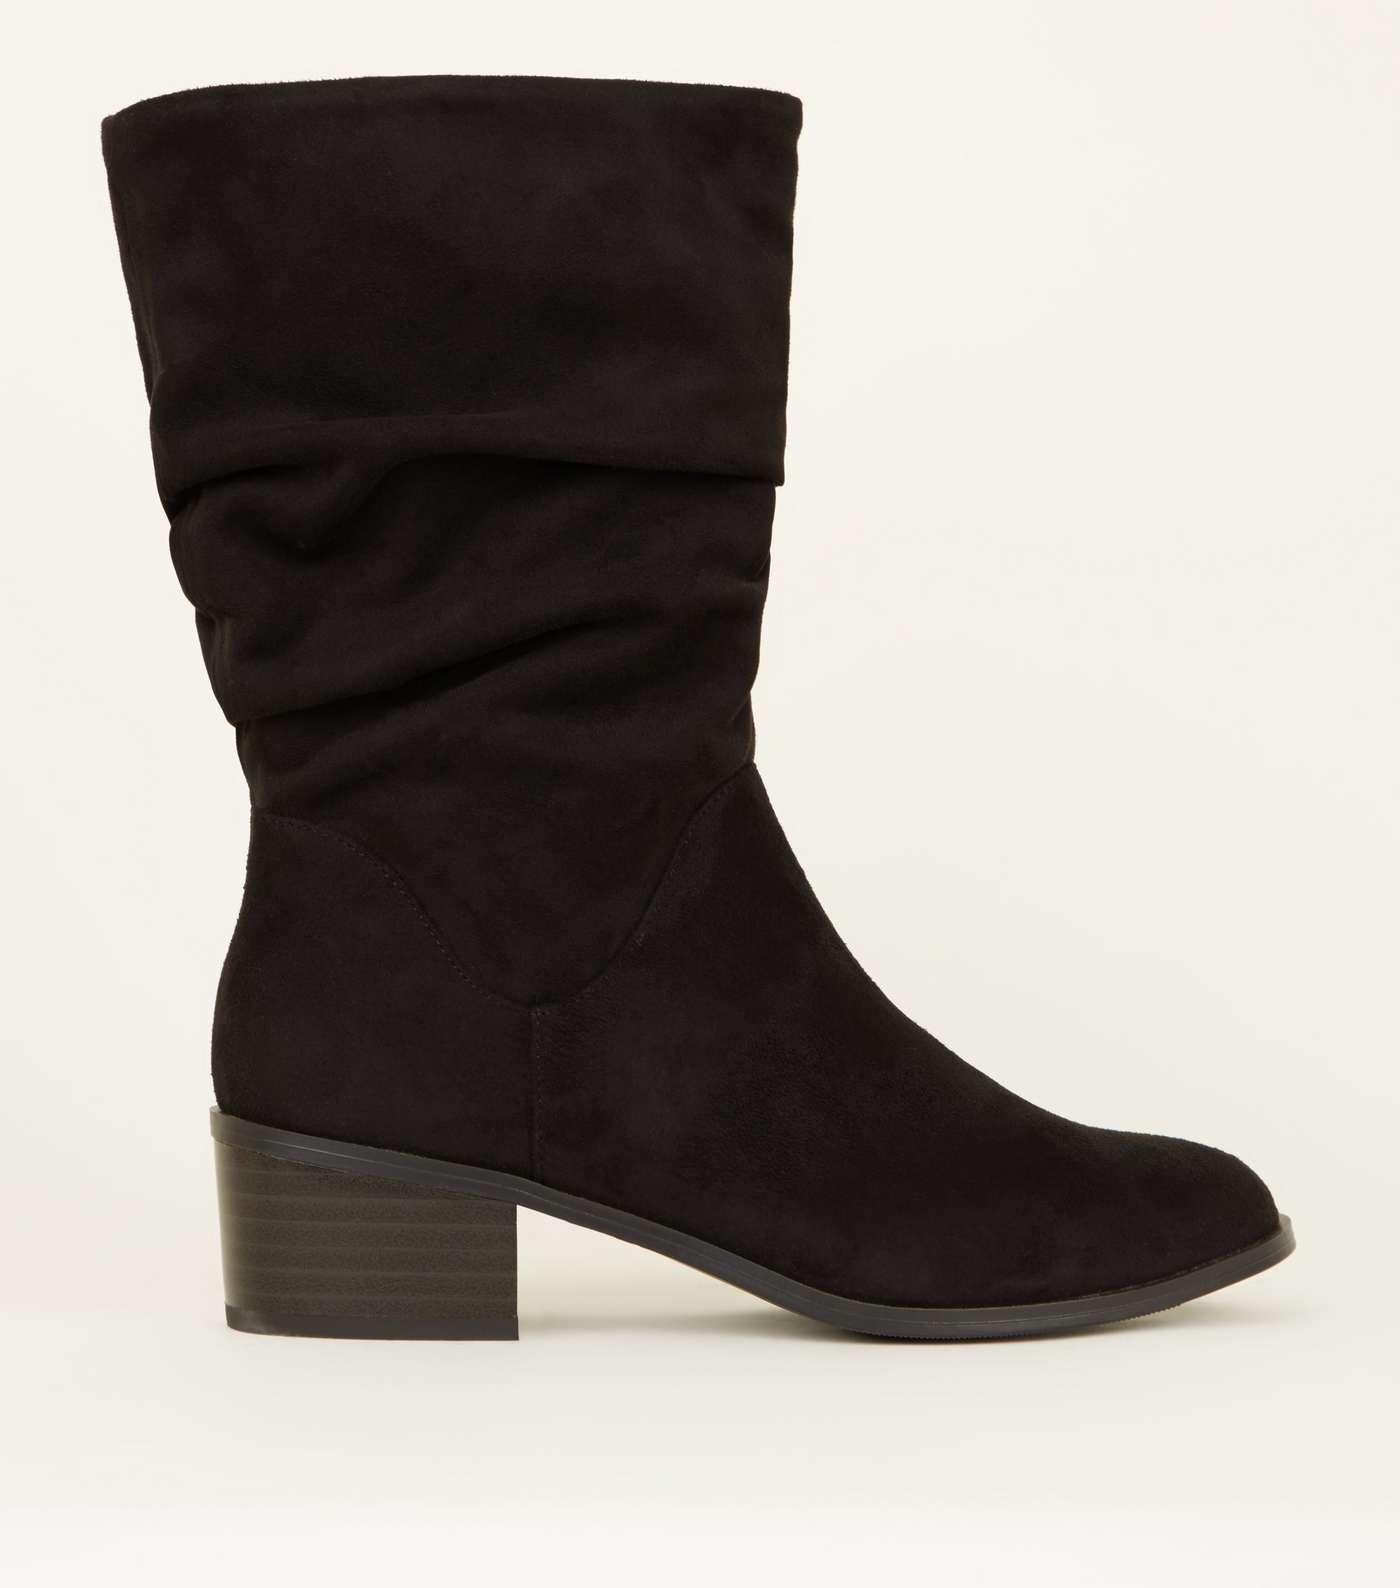 Girls Black Suedette Slouch Calf Boots